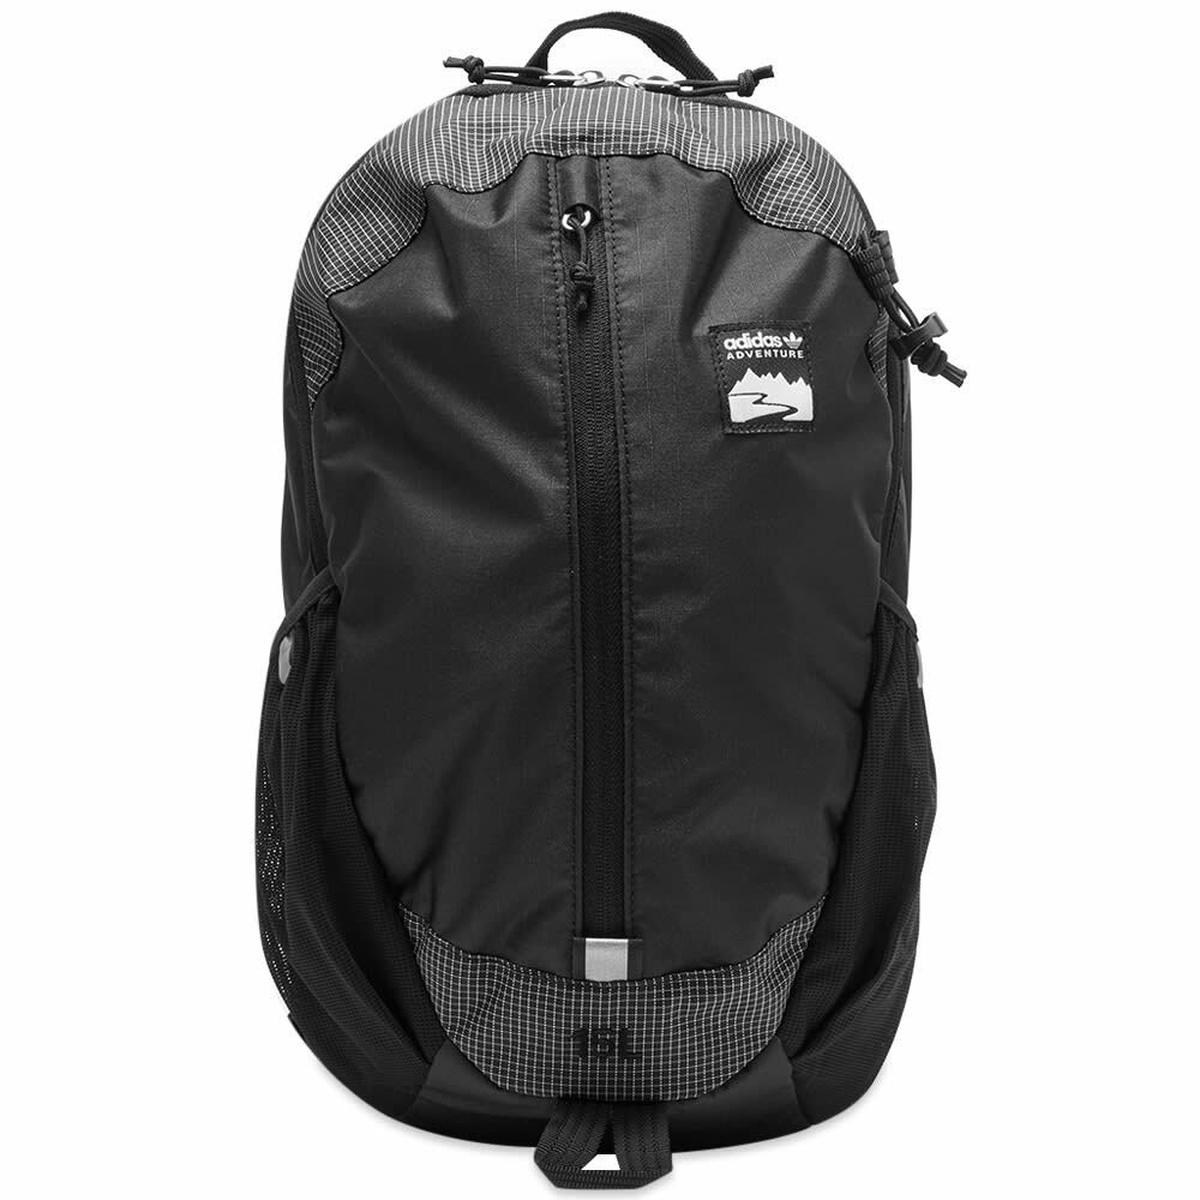 Adidas Adventure Small Backpack in Black adidas